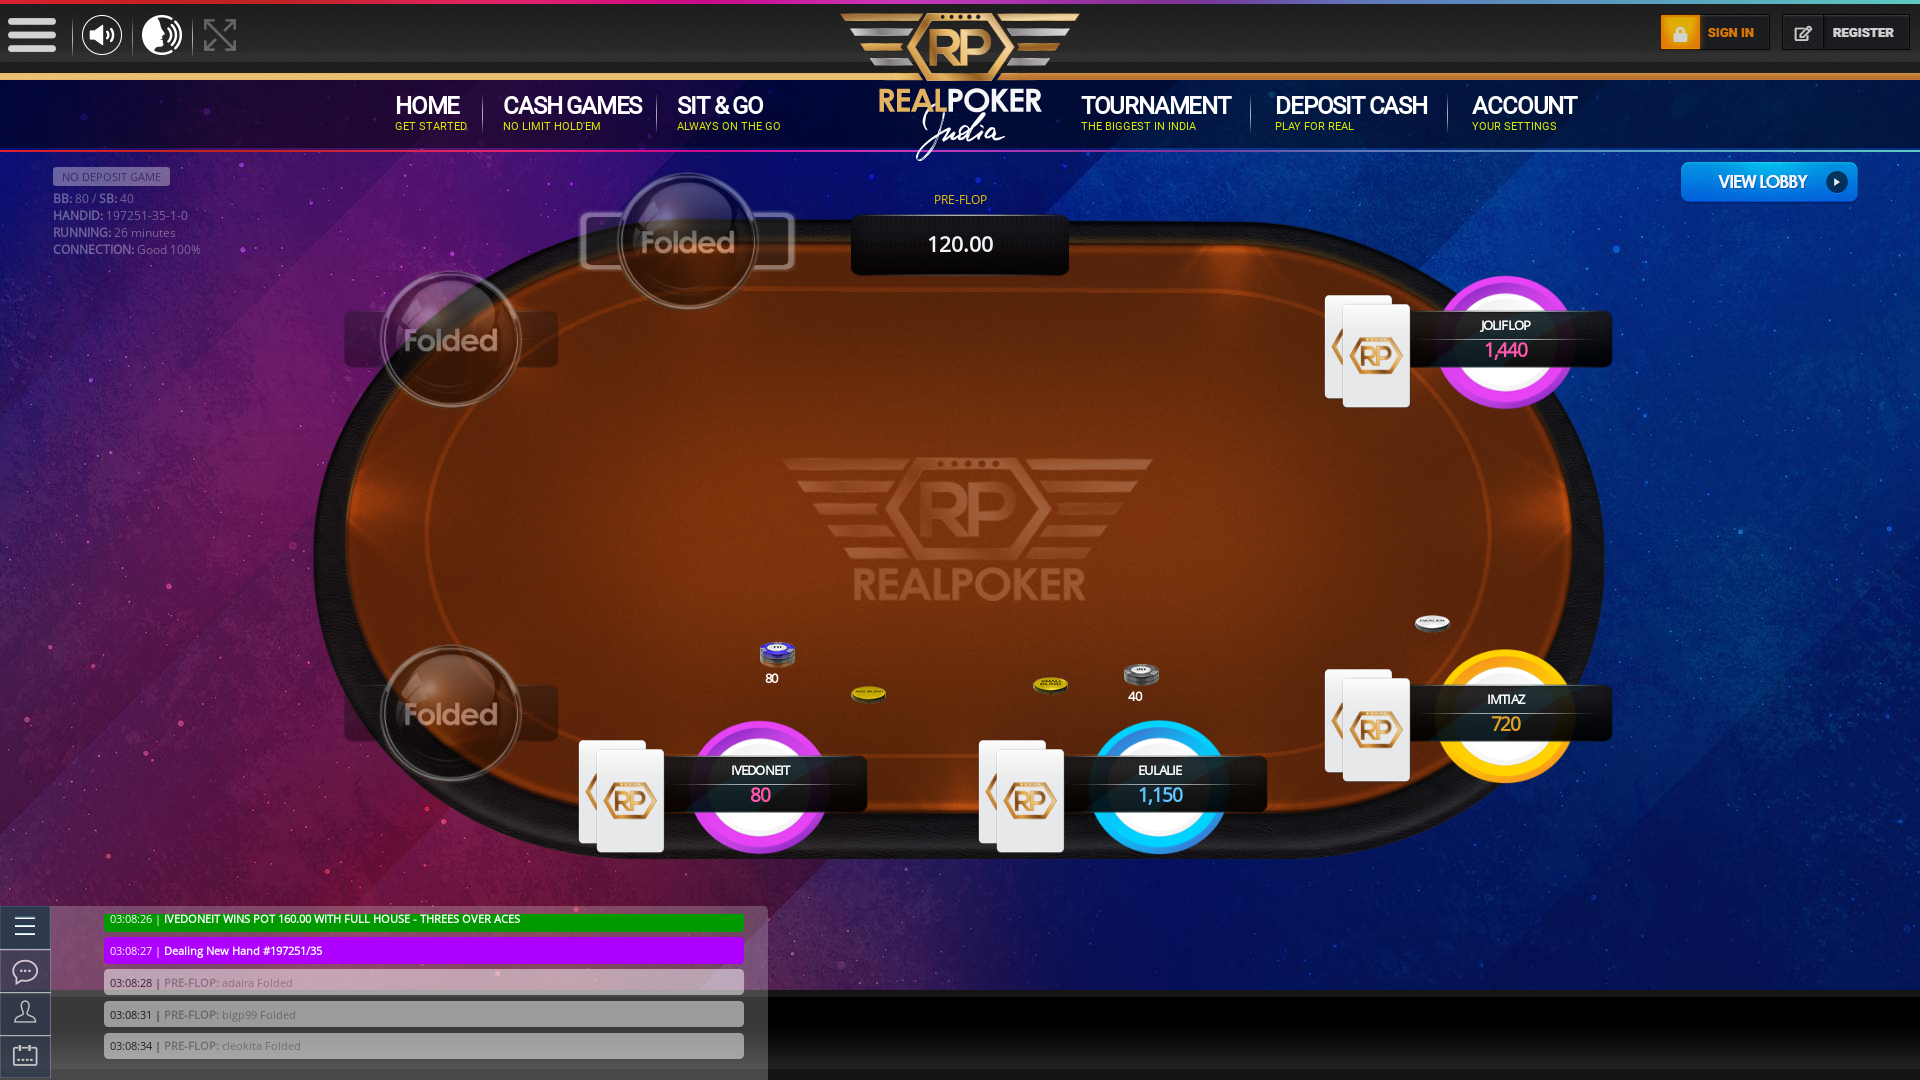 Online poker on a 10 player table in the 26th minute match up